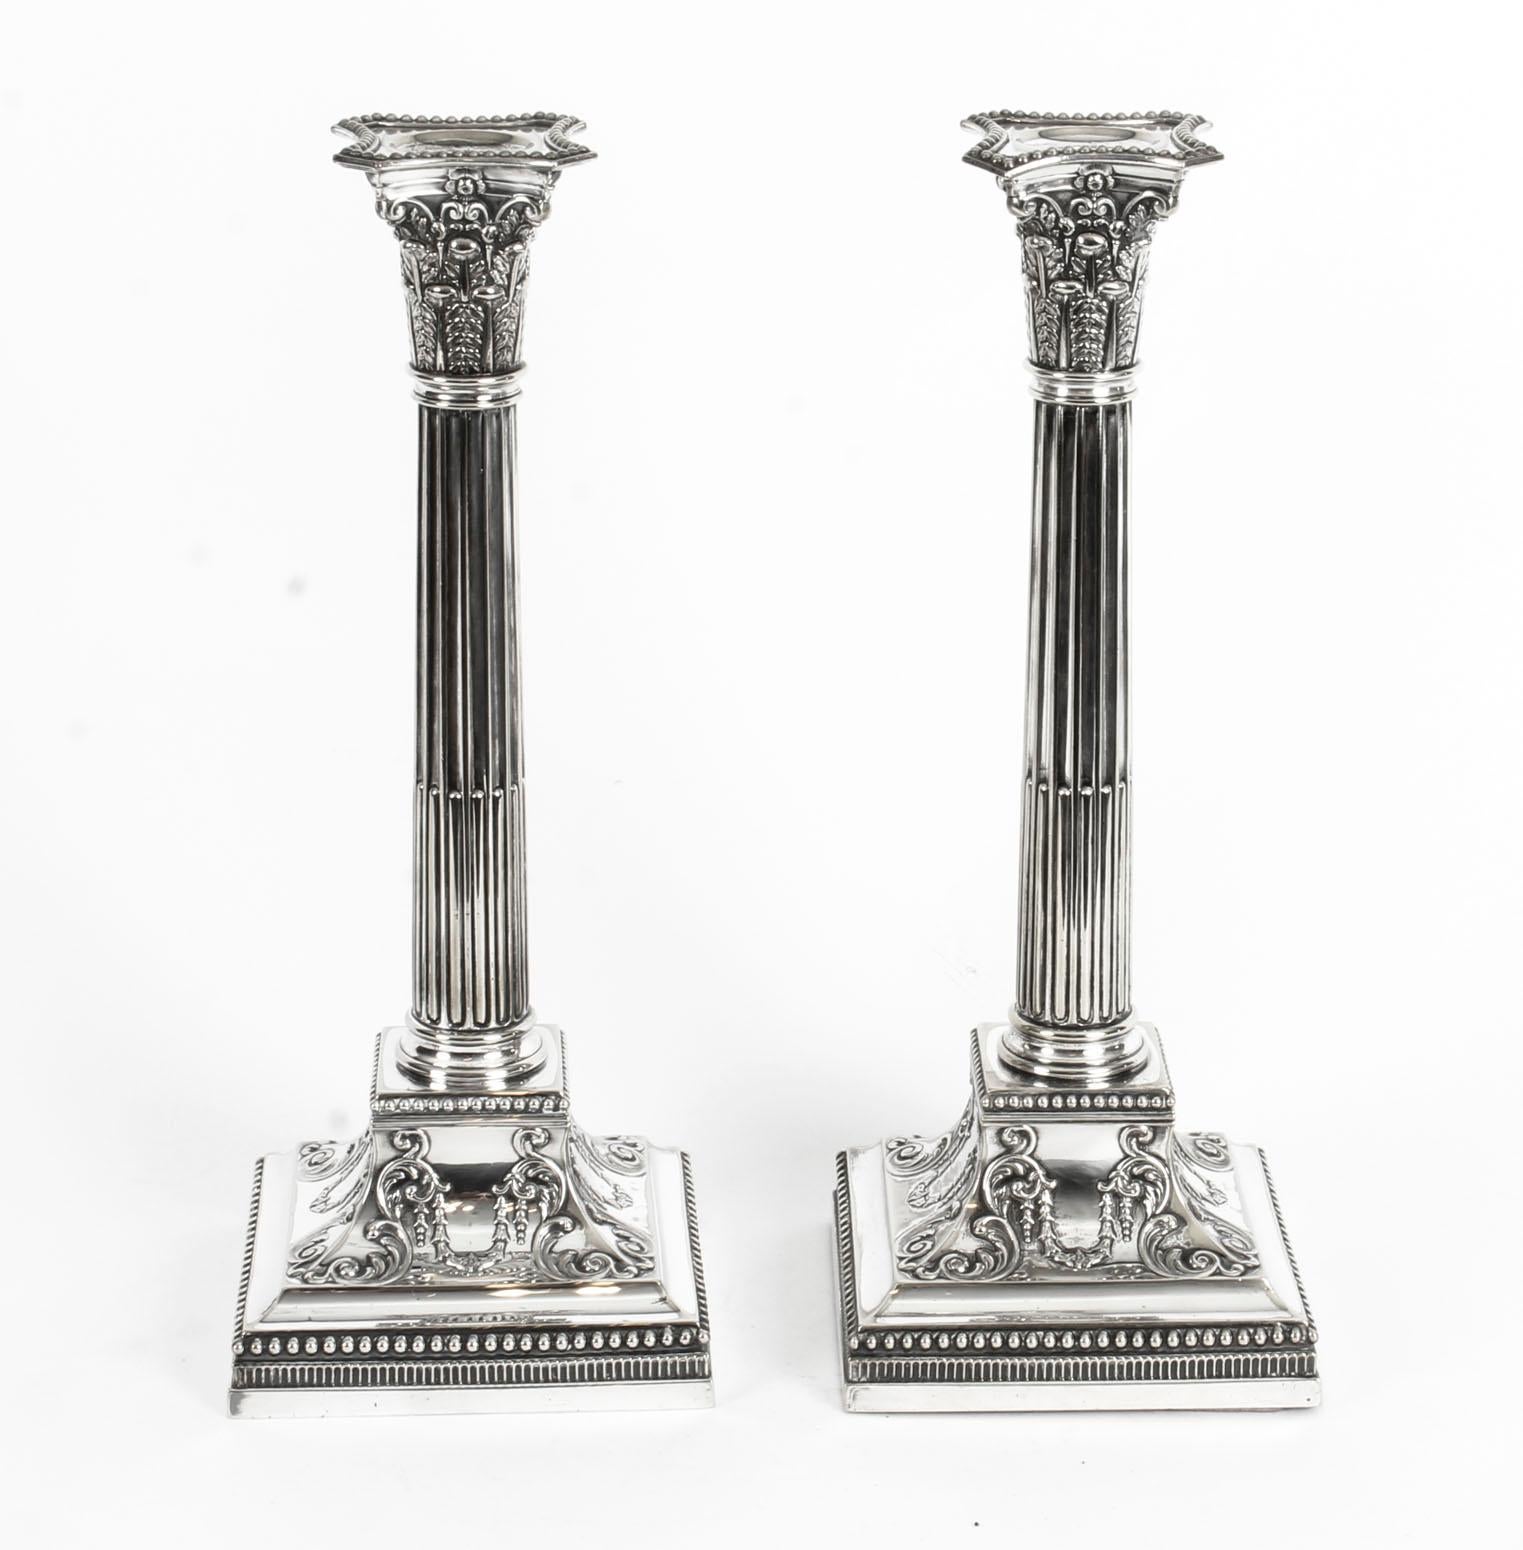 This is an exquisite pair of antique English silver plated candlesticks in neoclassical Corinthian column style and bearing the makers marks, inside the sconces, of the renowned silveresmith, James Dixon & Sons, Sheffield, circa 1870 in